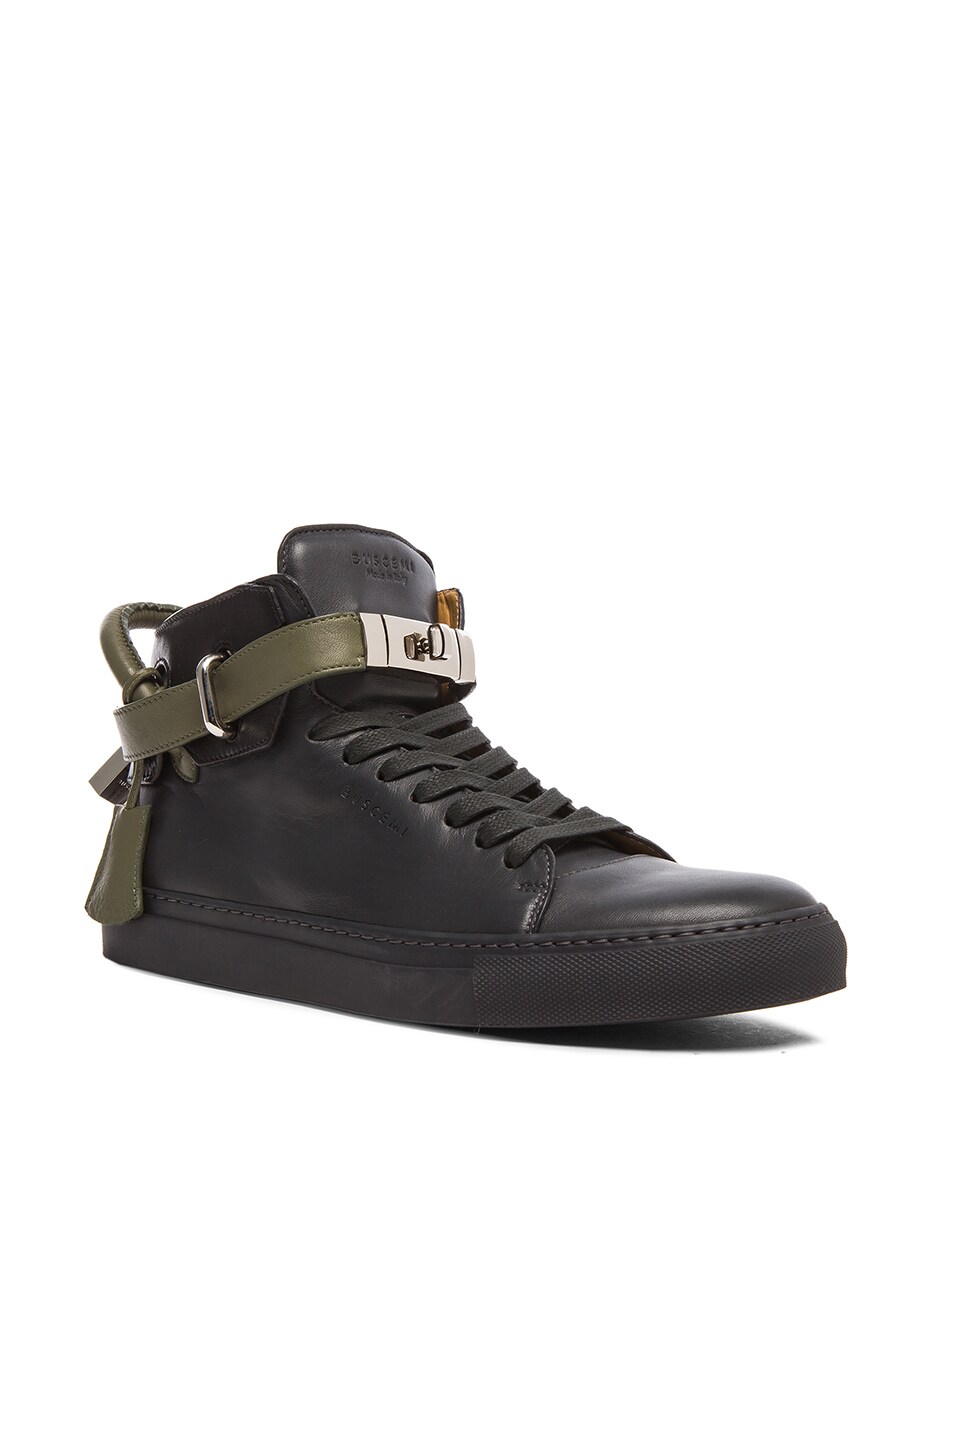 Image 1 of Buscemi 100MM Leather High Tops in Charcoal & Black Elaphe